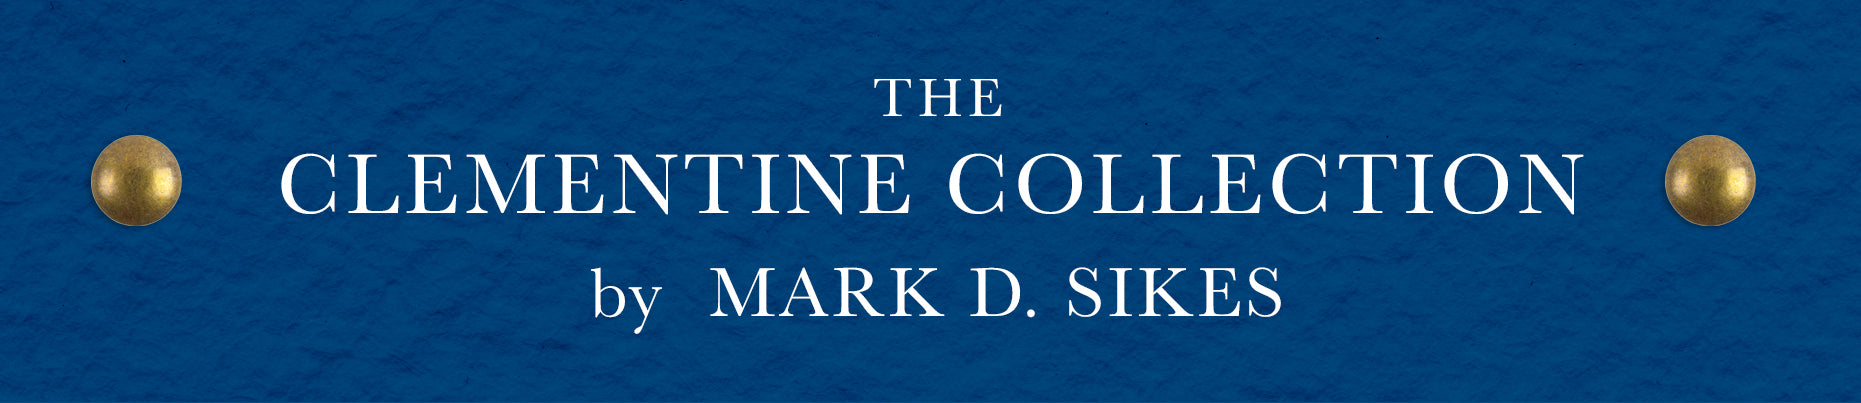 The Clementine Collection by Mark D. Sikes